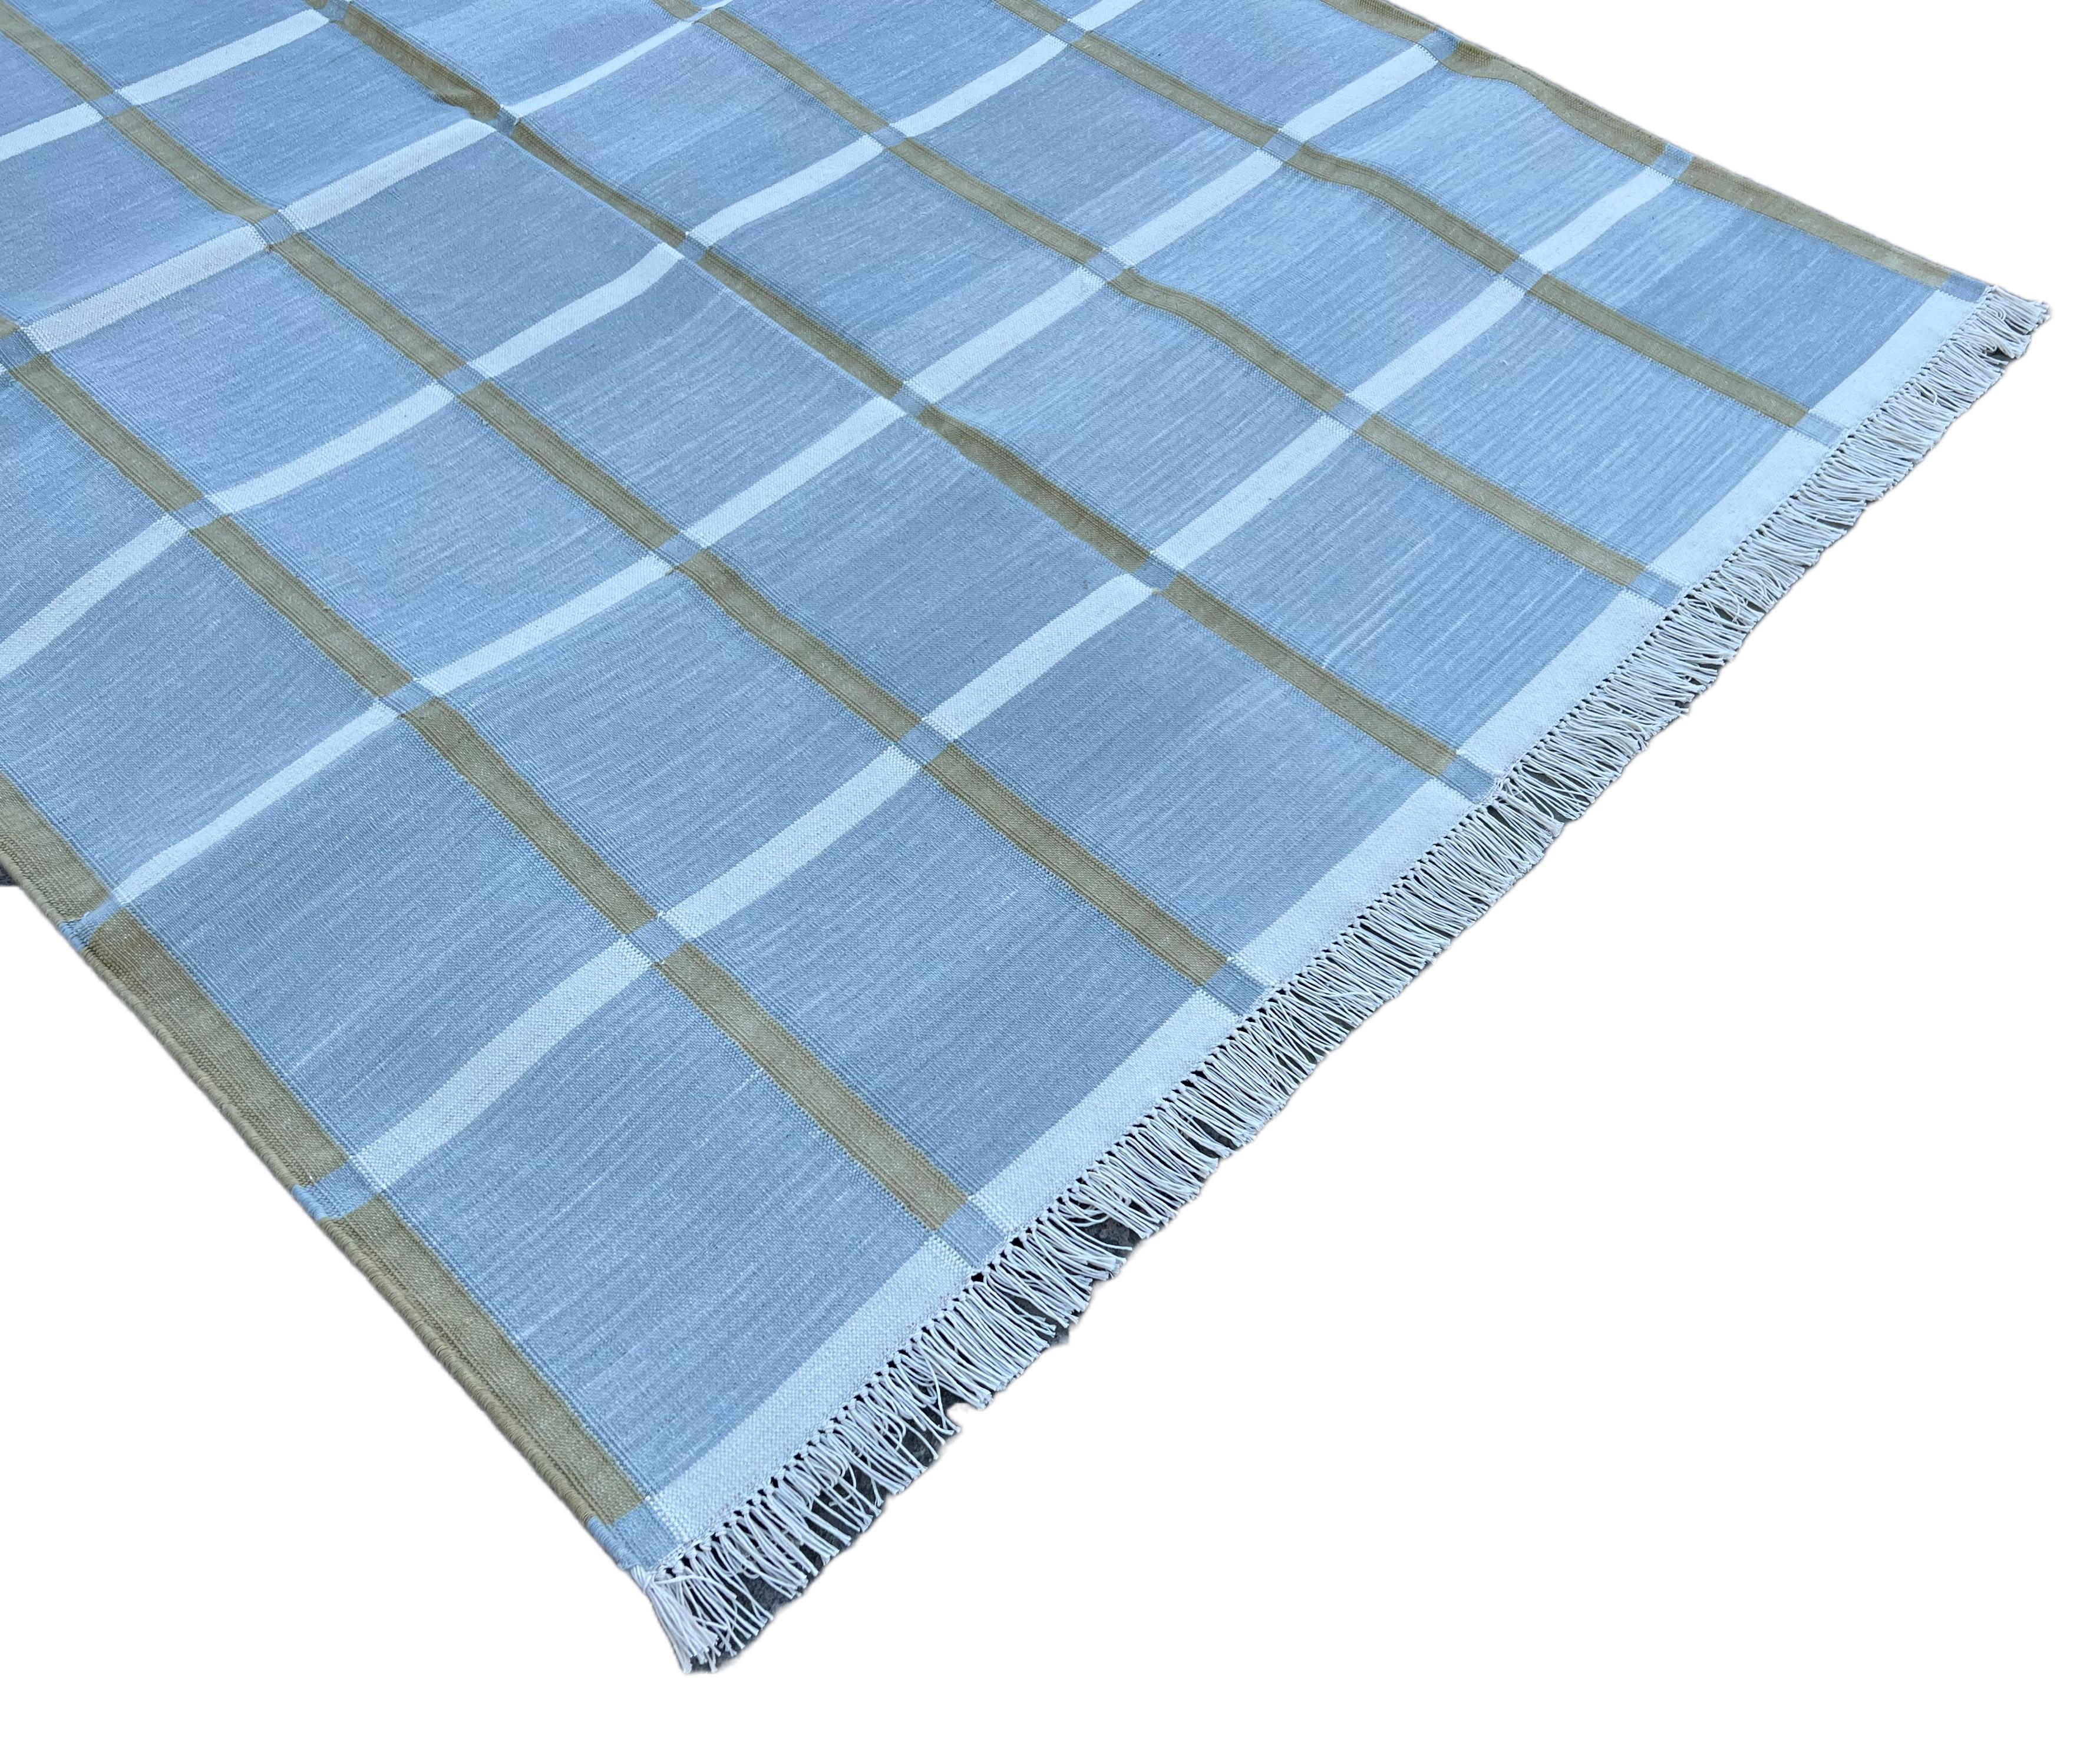 Hand-Woven Handmade Cotton Flat Weave Rug, 4x6 Grey, Green Windowpane Check Indian Dhurrie For Sale